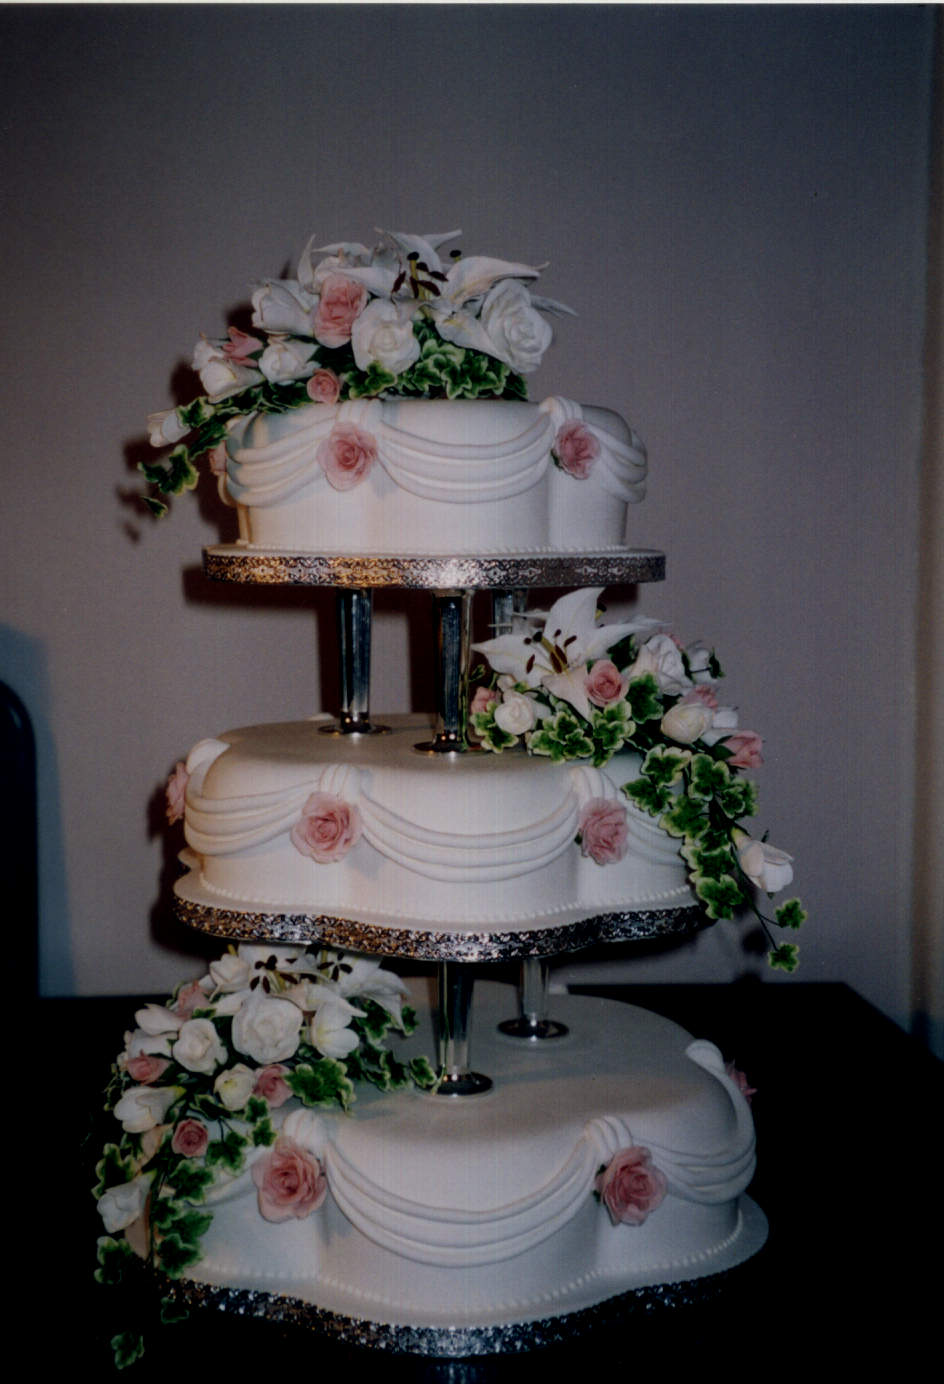 3 Tier Petal Wedding Cake With Sugar Lillies And Roses | Susie's Cakes